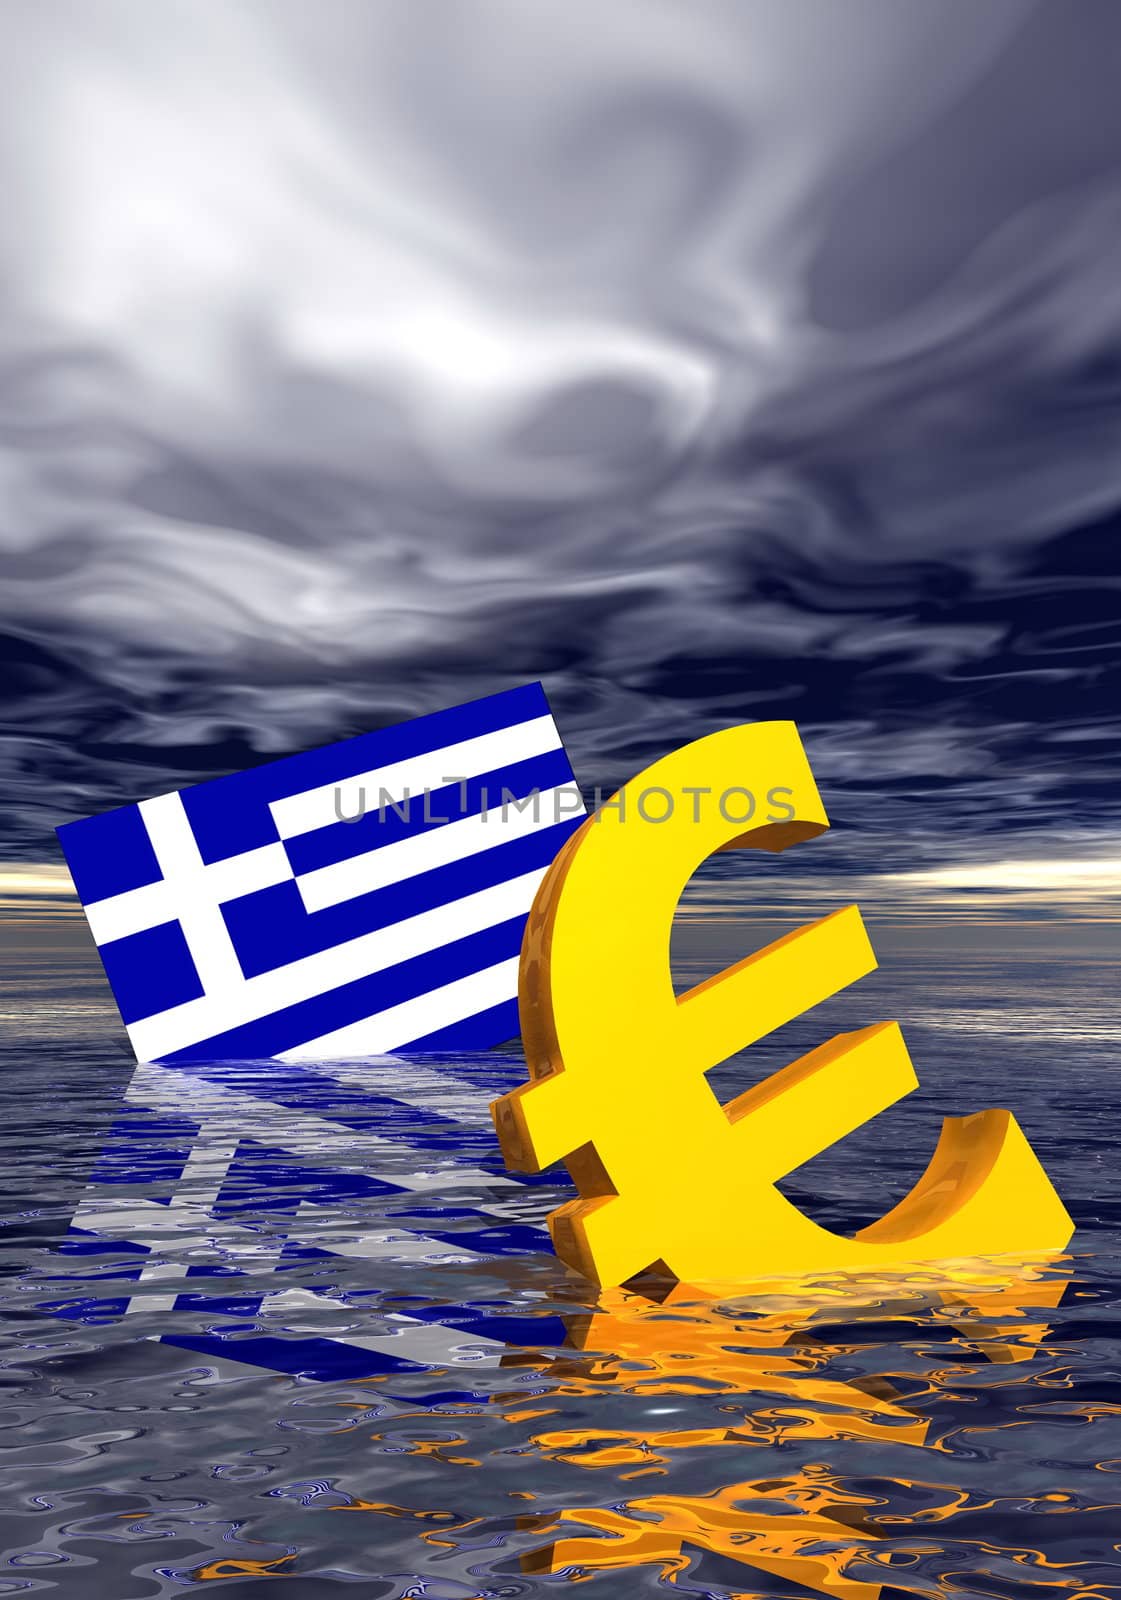 Ill euro symbol and greek flag drowning in the ocean by stormy weather